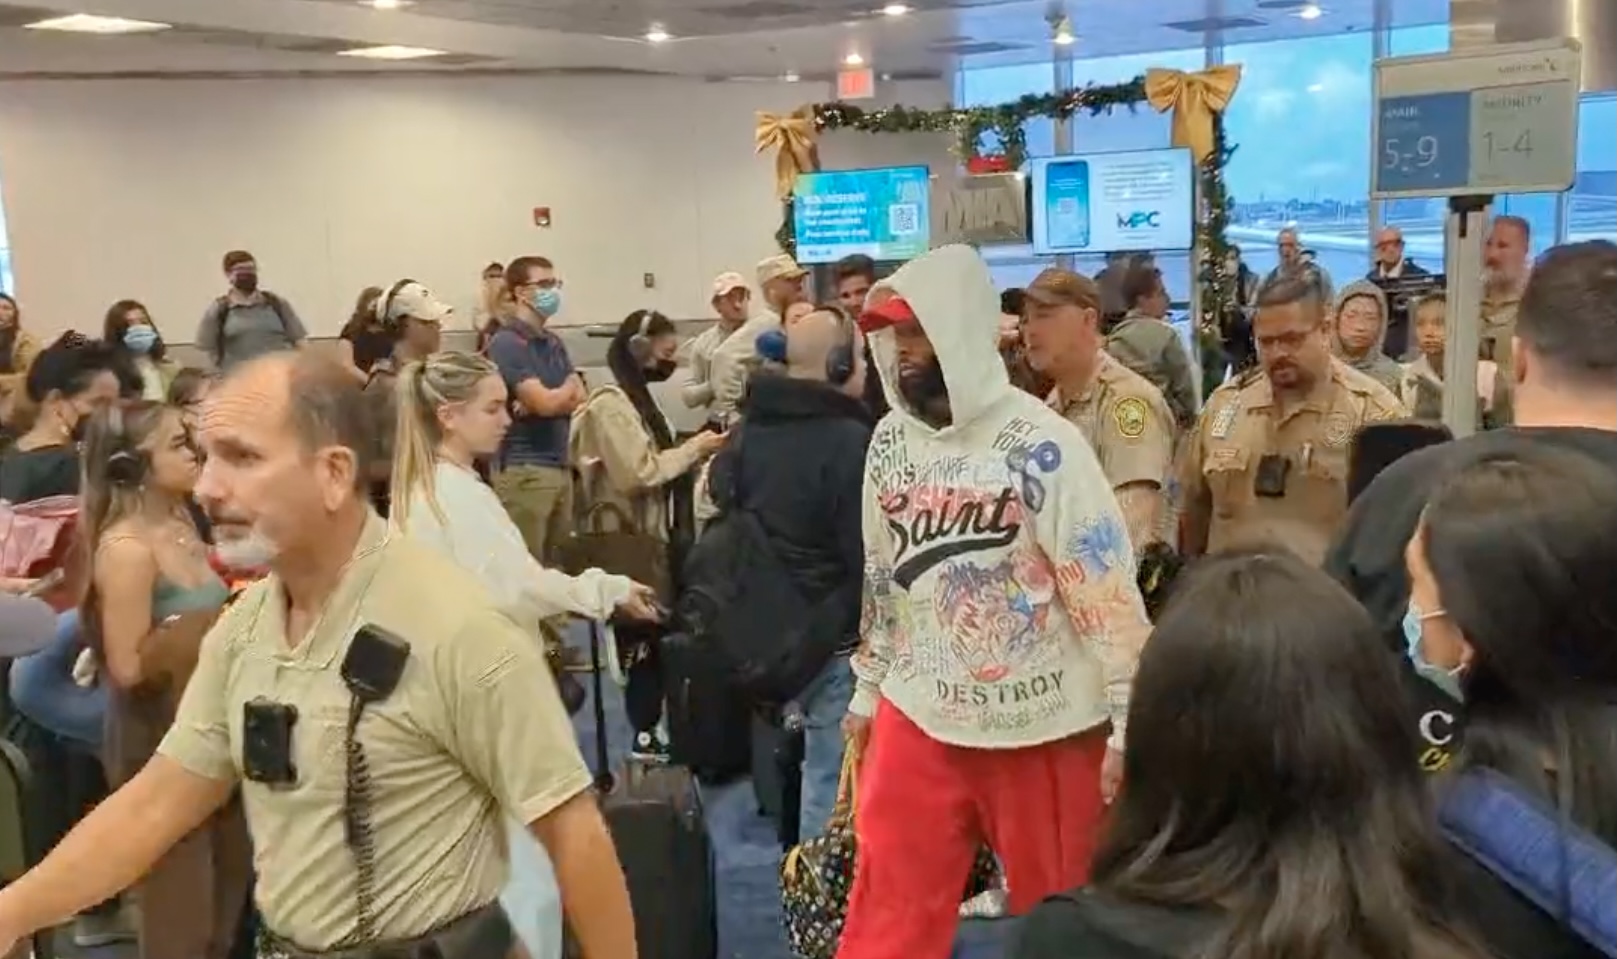 Odell Beckham Jr. escorted off American Airlines flight by police